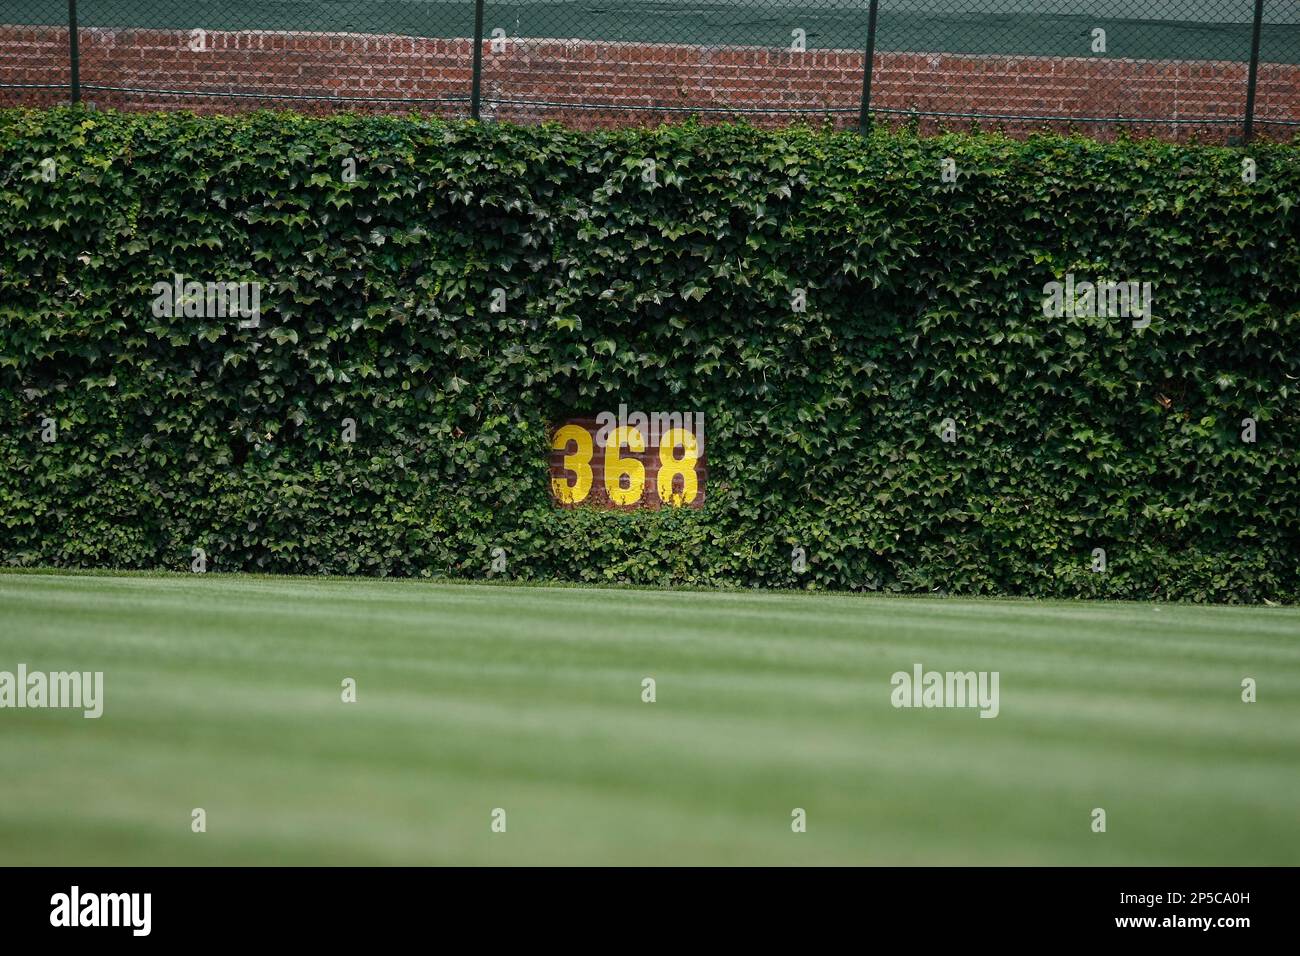 CHICAGO, IL - AUGUST 7: A detail view of the ivy covered 368 foot marker on  the outfield wall of Wrigley Field during the game between the Chicago Cubs  against the Cincinnati